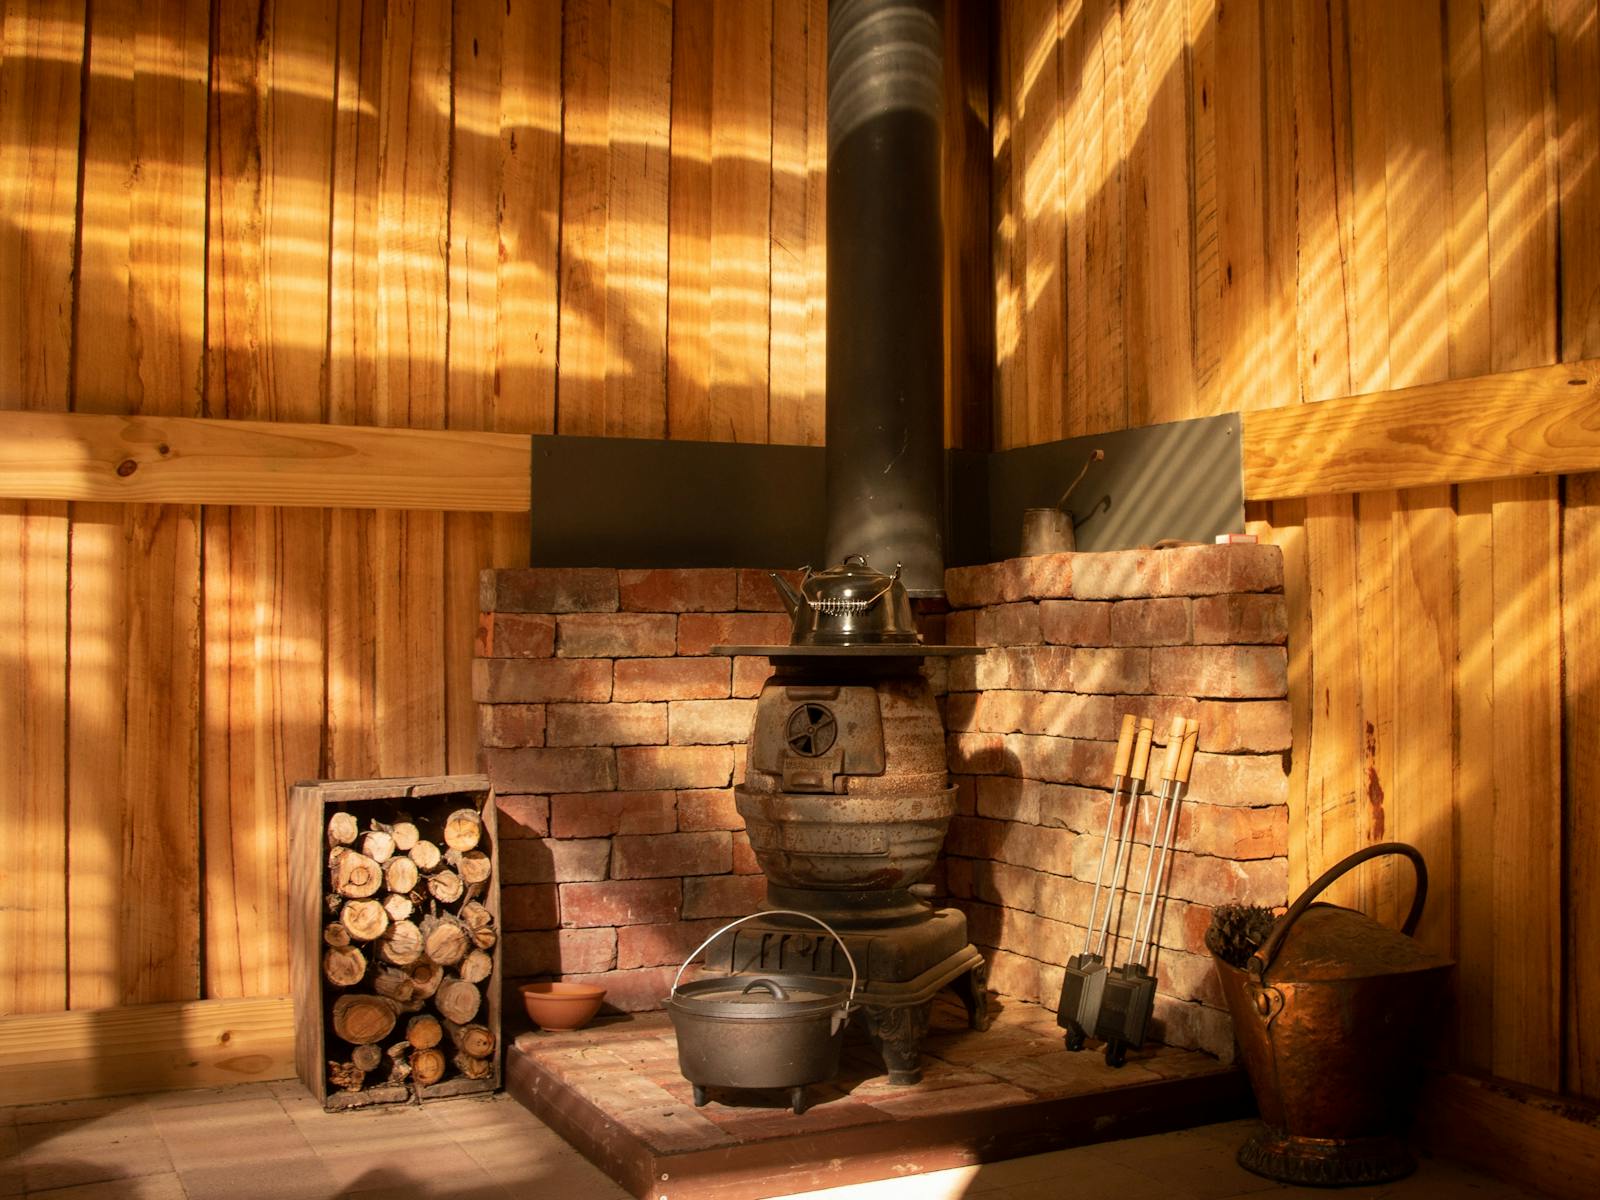 A small wood fired stove sits in the corner of a rustic shed, surrounded by red bricks.